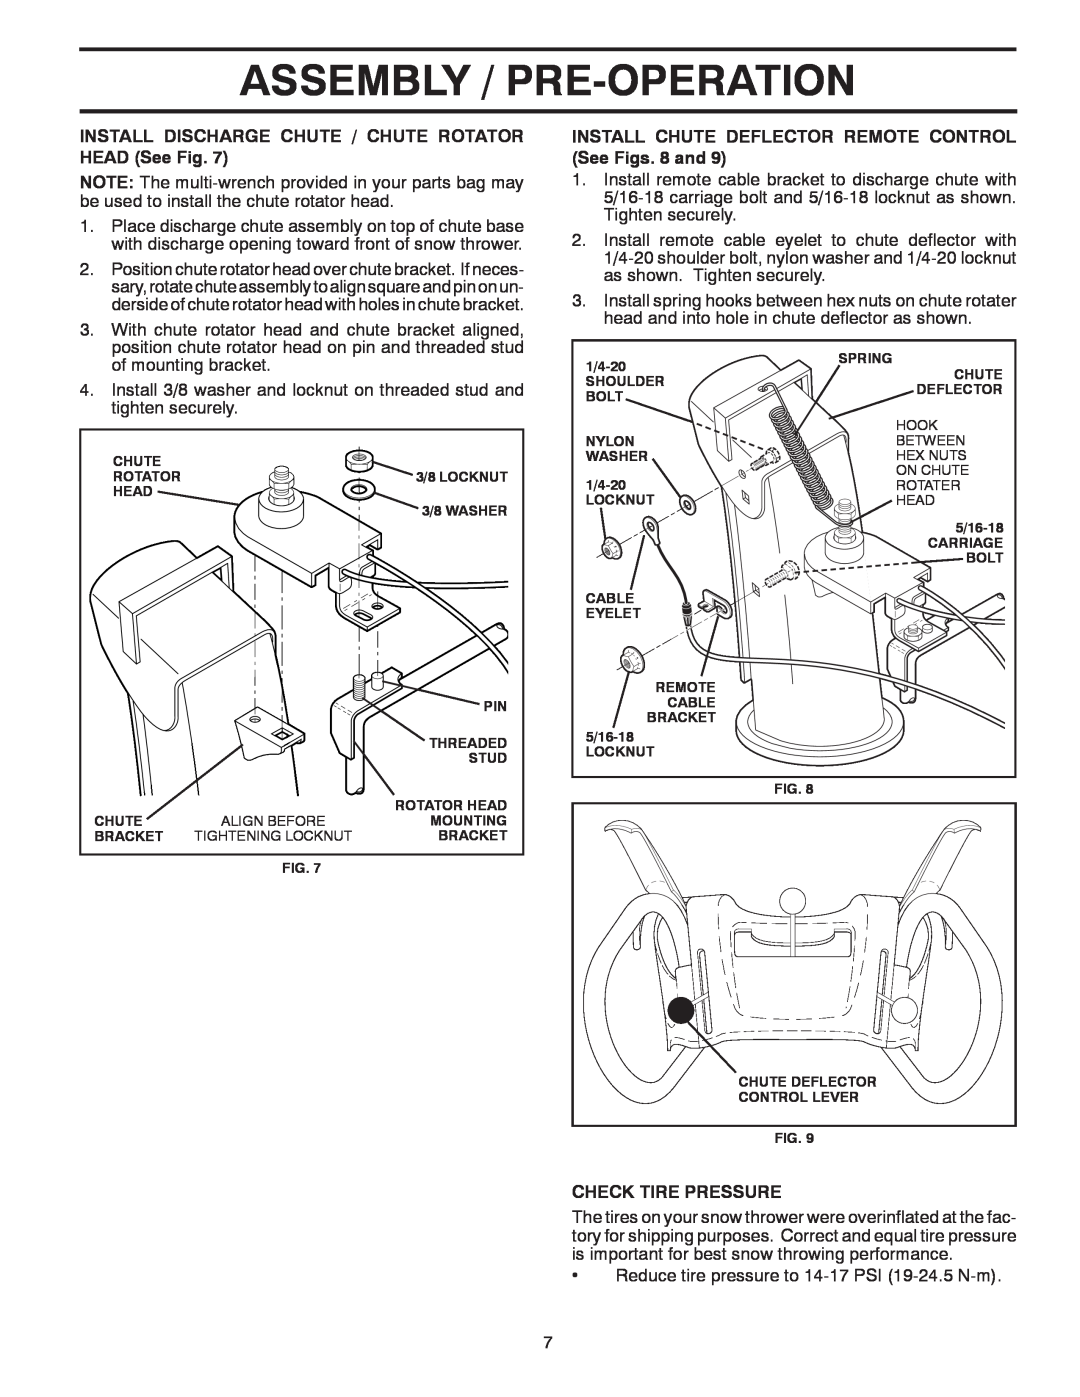 Poulan 414949 Assembly / Pre-Operation, INSTALL DISCHARGE CHUTE / CHUTE ROTATOR HEAD See Fig, Check Tire Pressure 